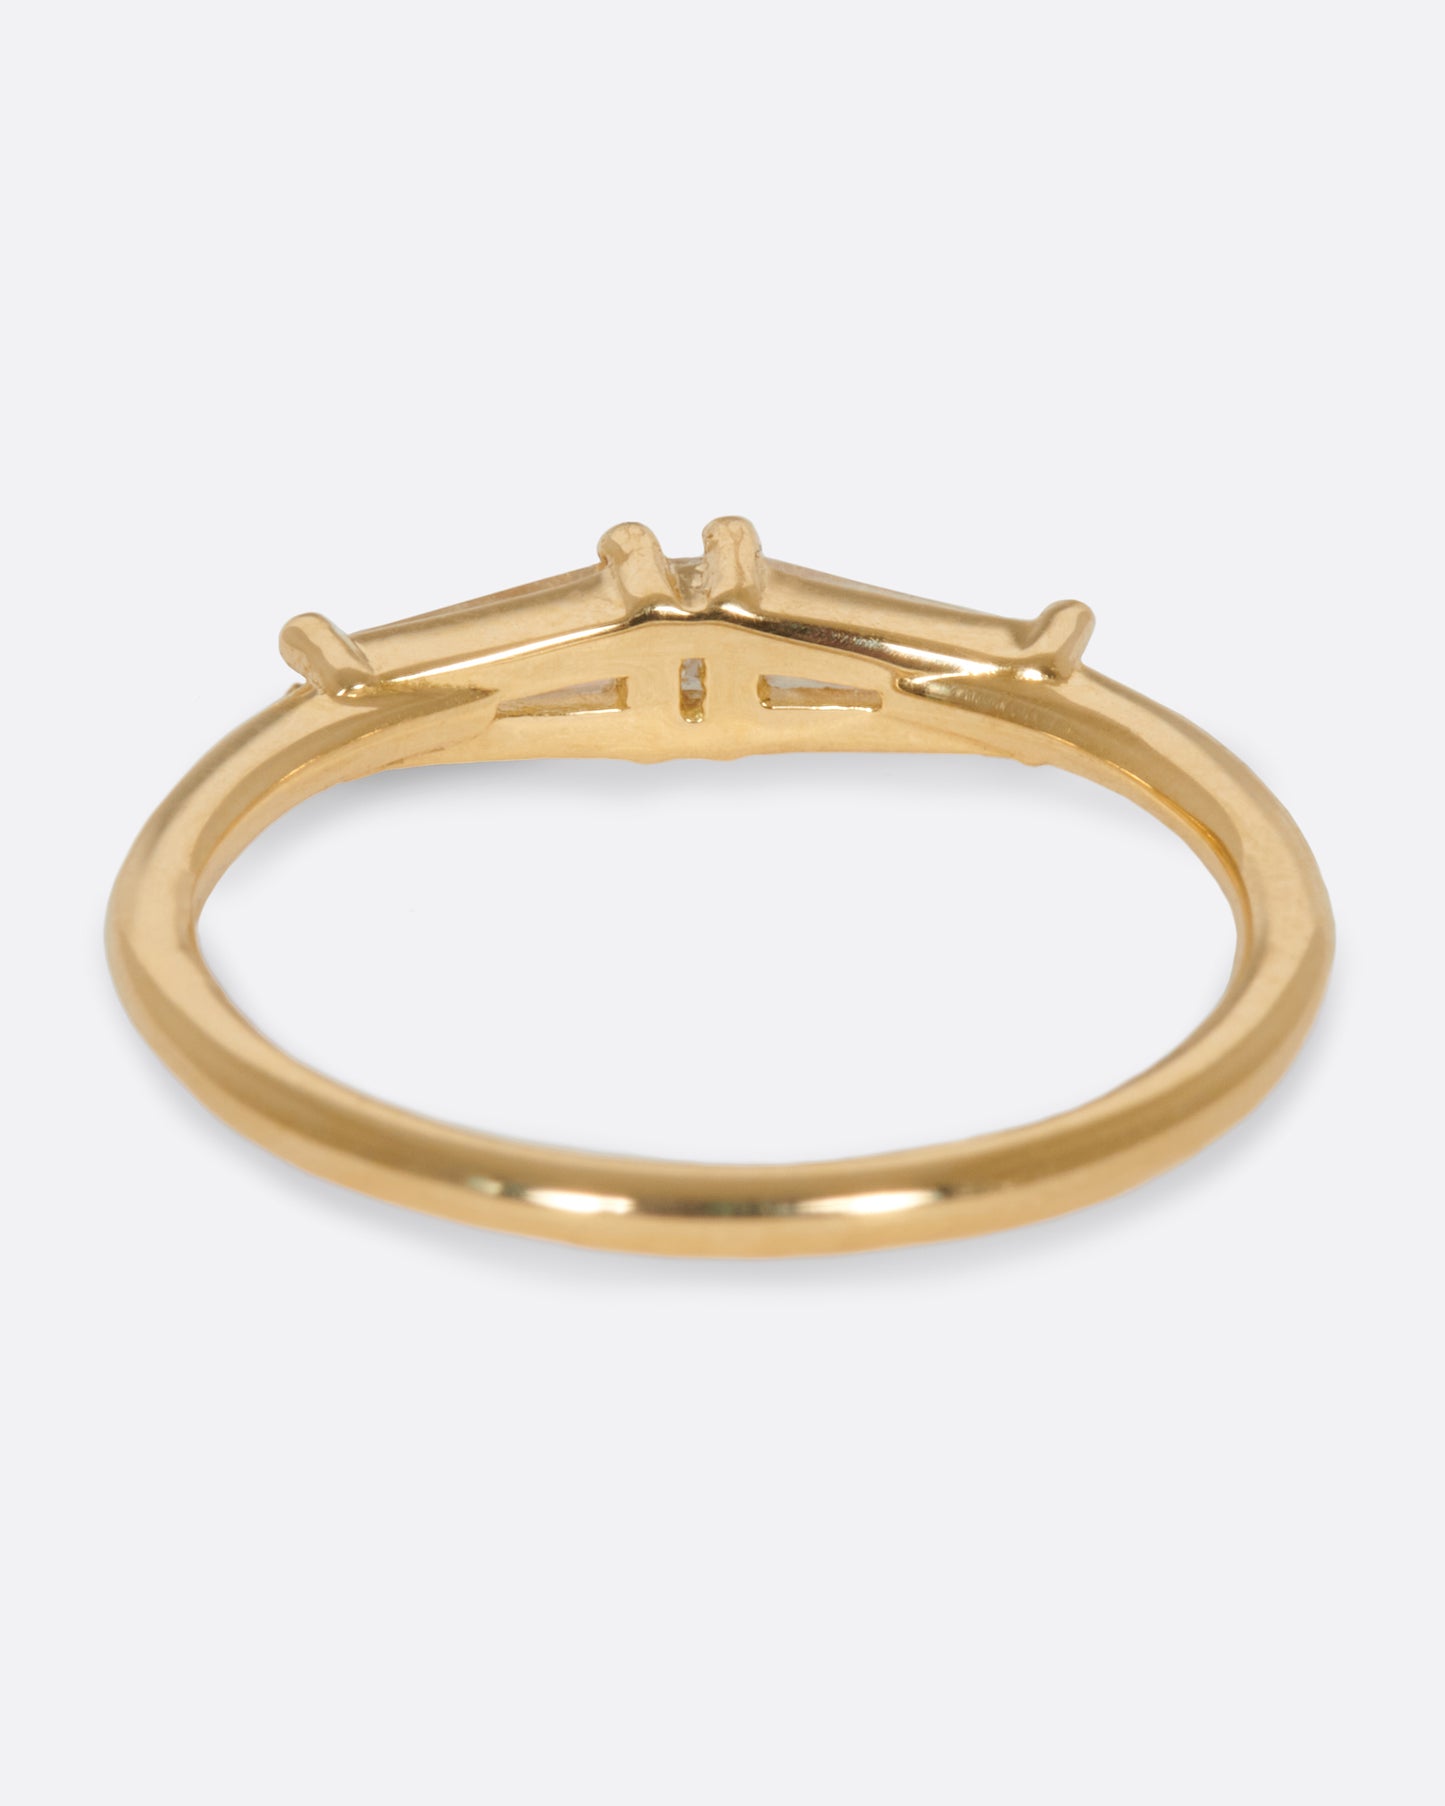 A ring featuring two tapered baguette diamonds and one carre cut diamond; perfect for stacking.